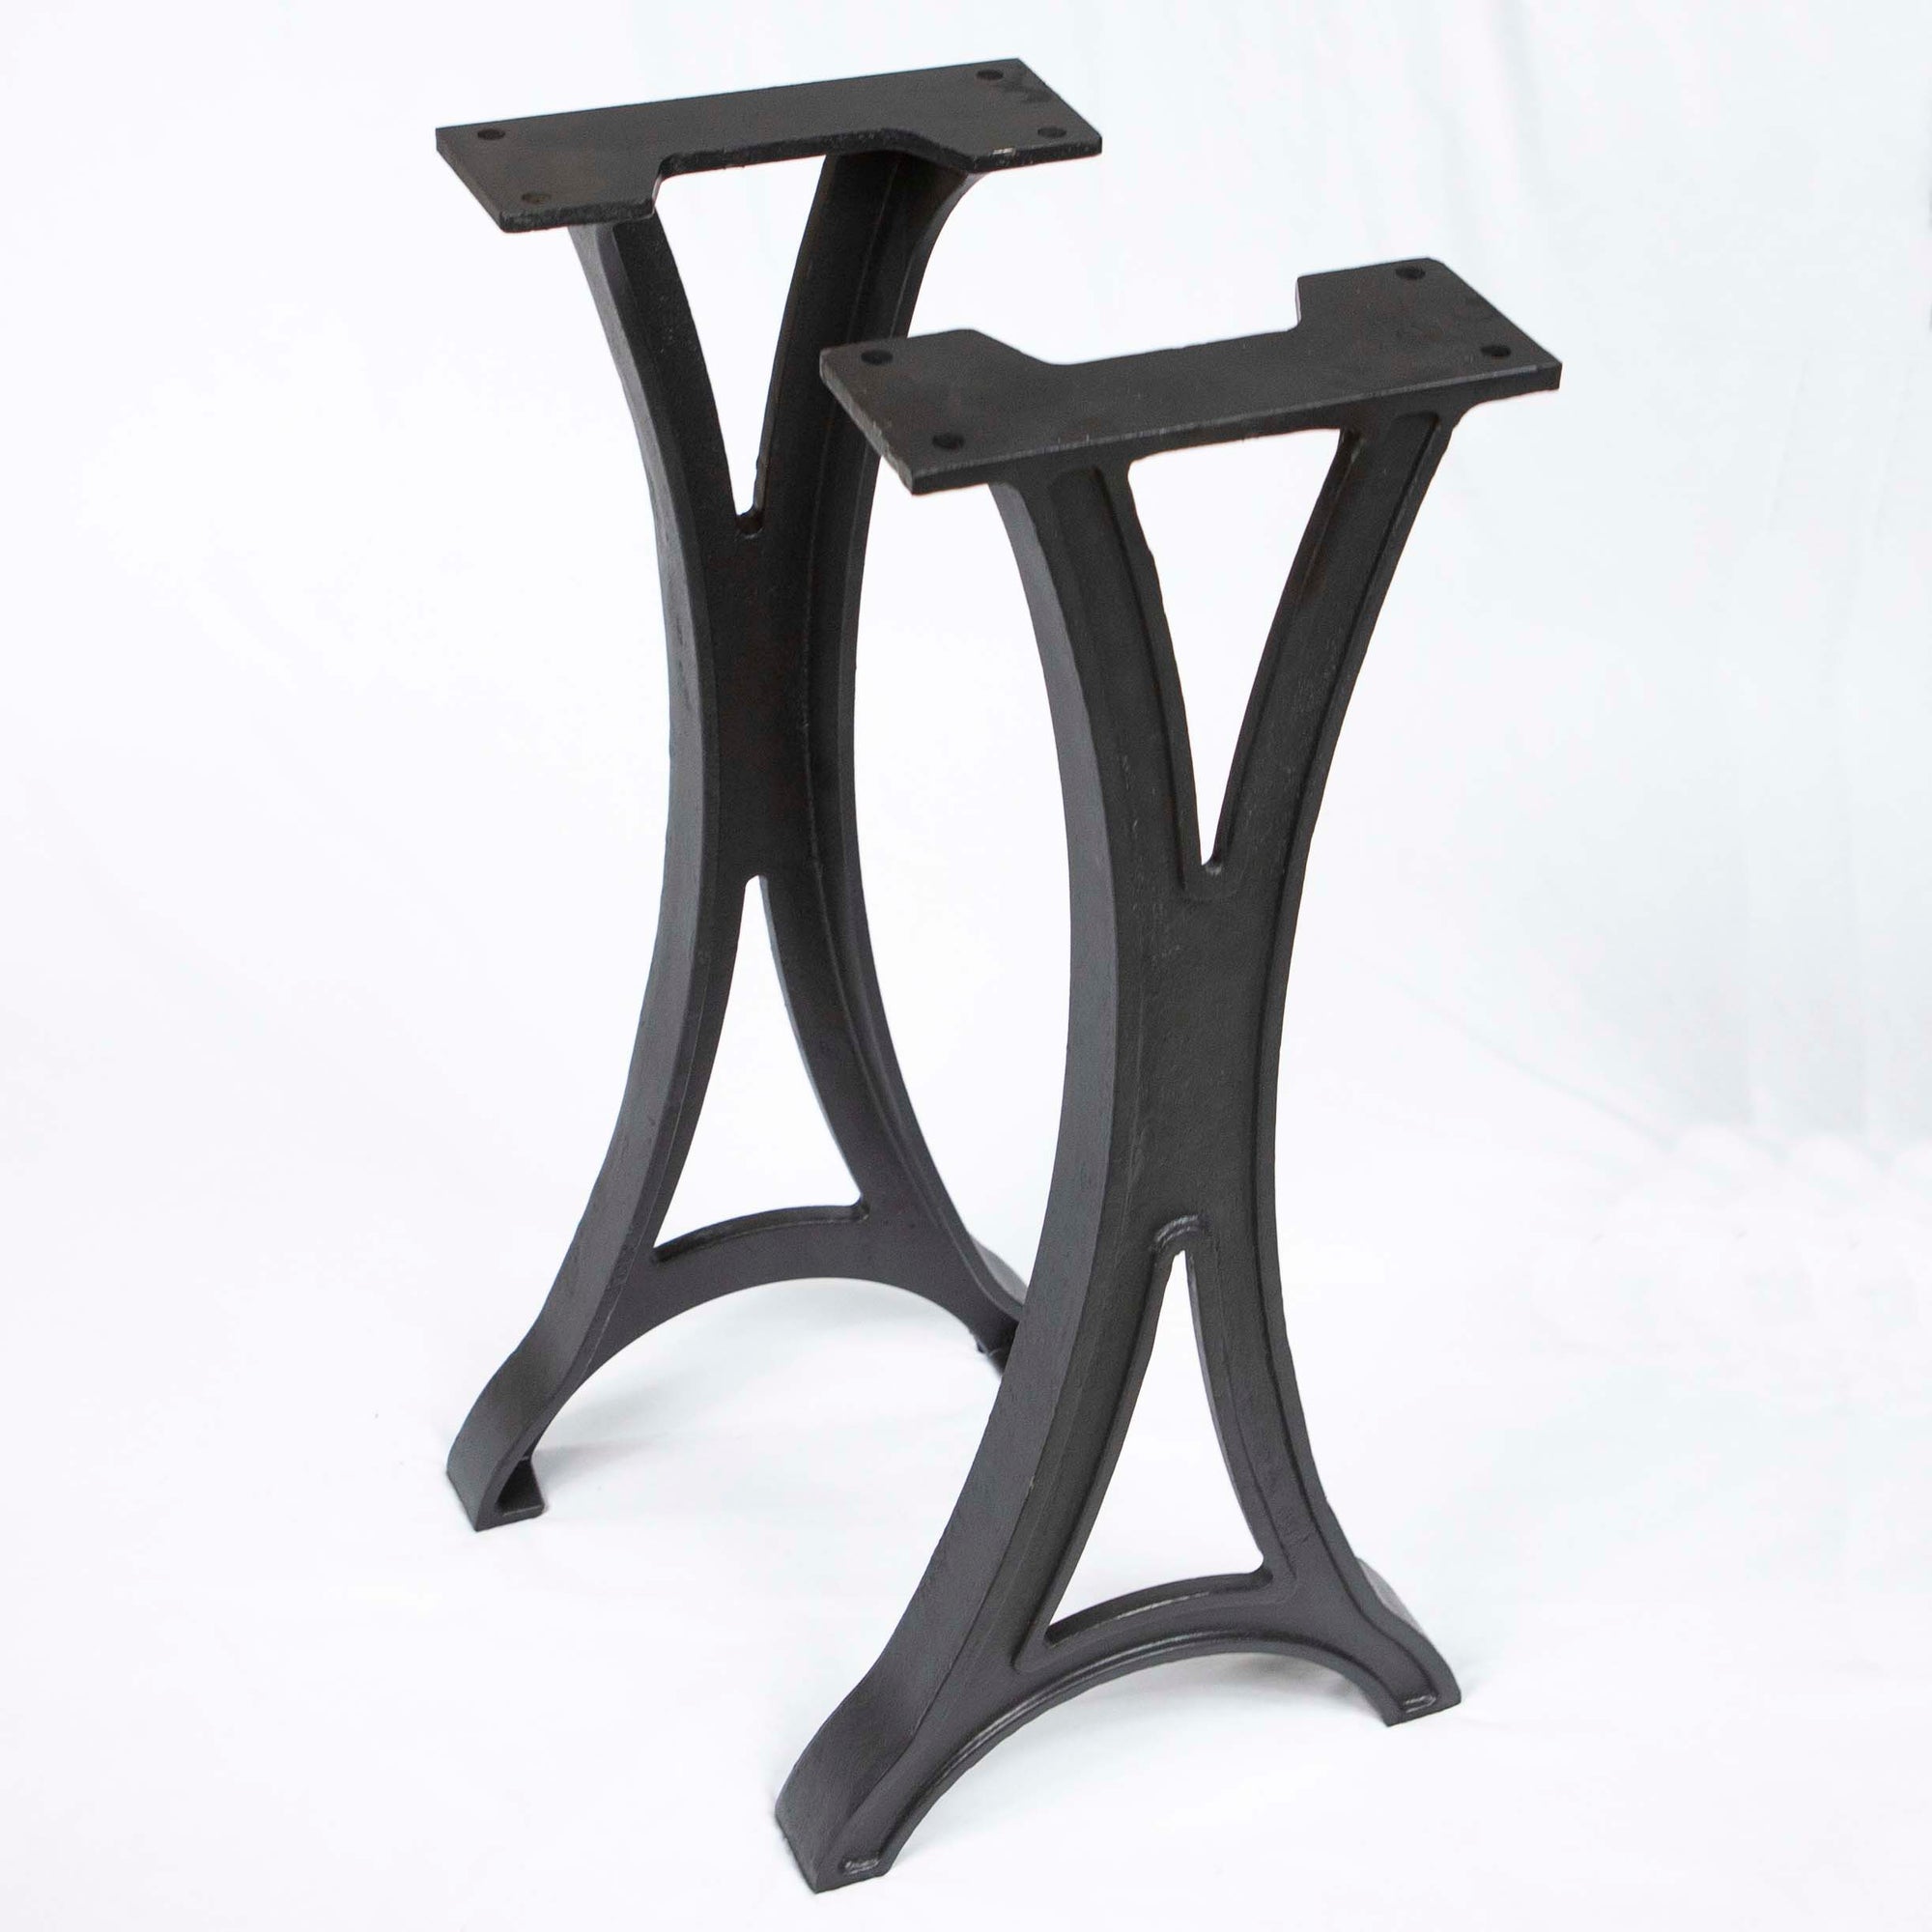 CN730 Cast Iron Legs for Console or Sofa Table, 1 Pair